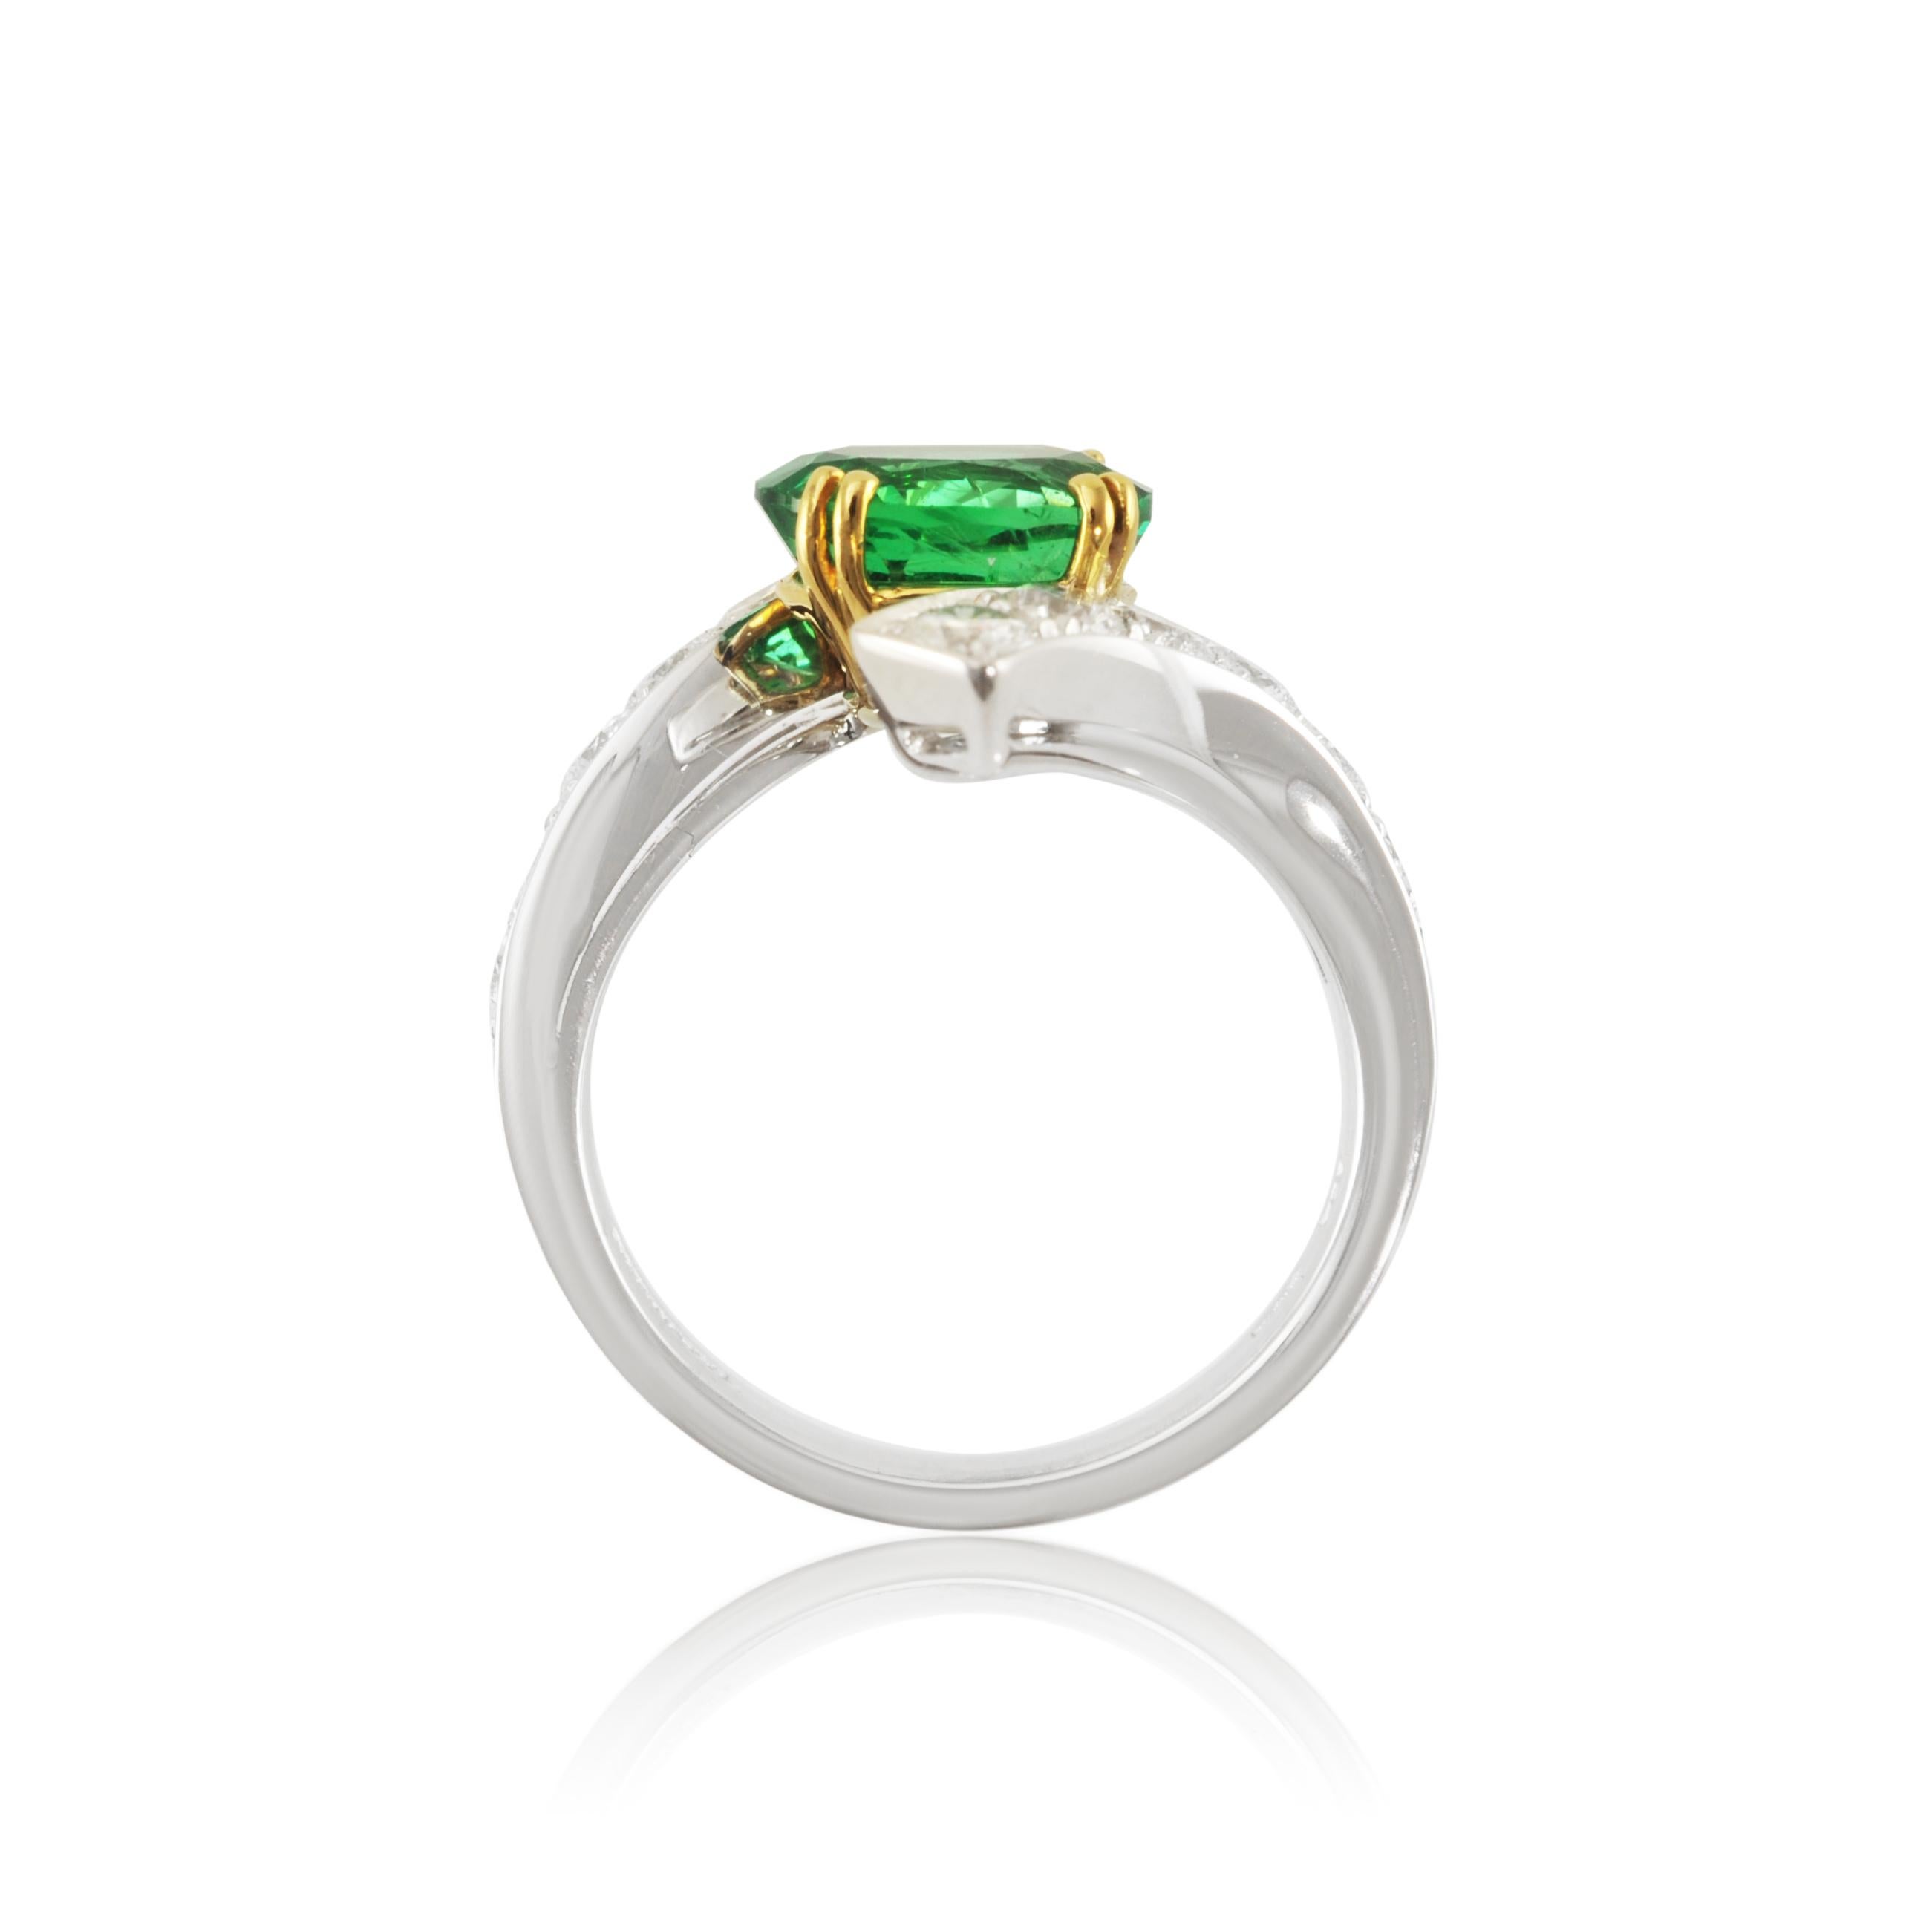 Contemporary Picchiotti 18 Karat White and Yellow Gold Fashion Ring with Diamonds and Emerald For Sale